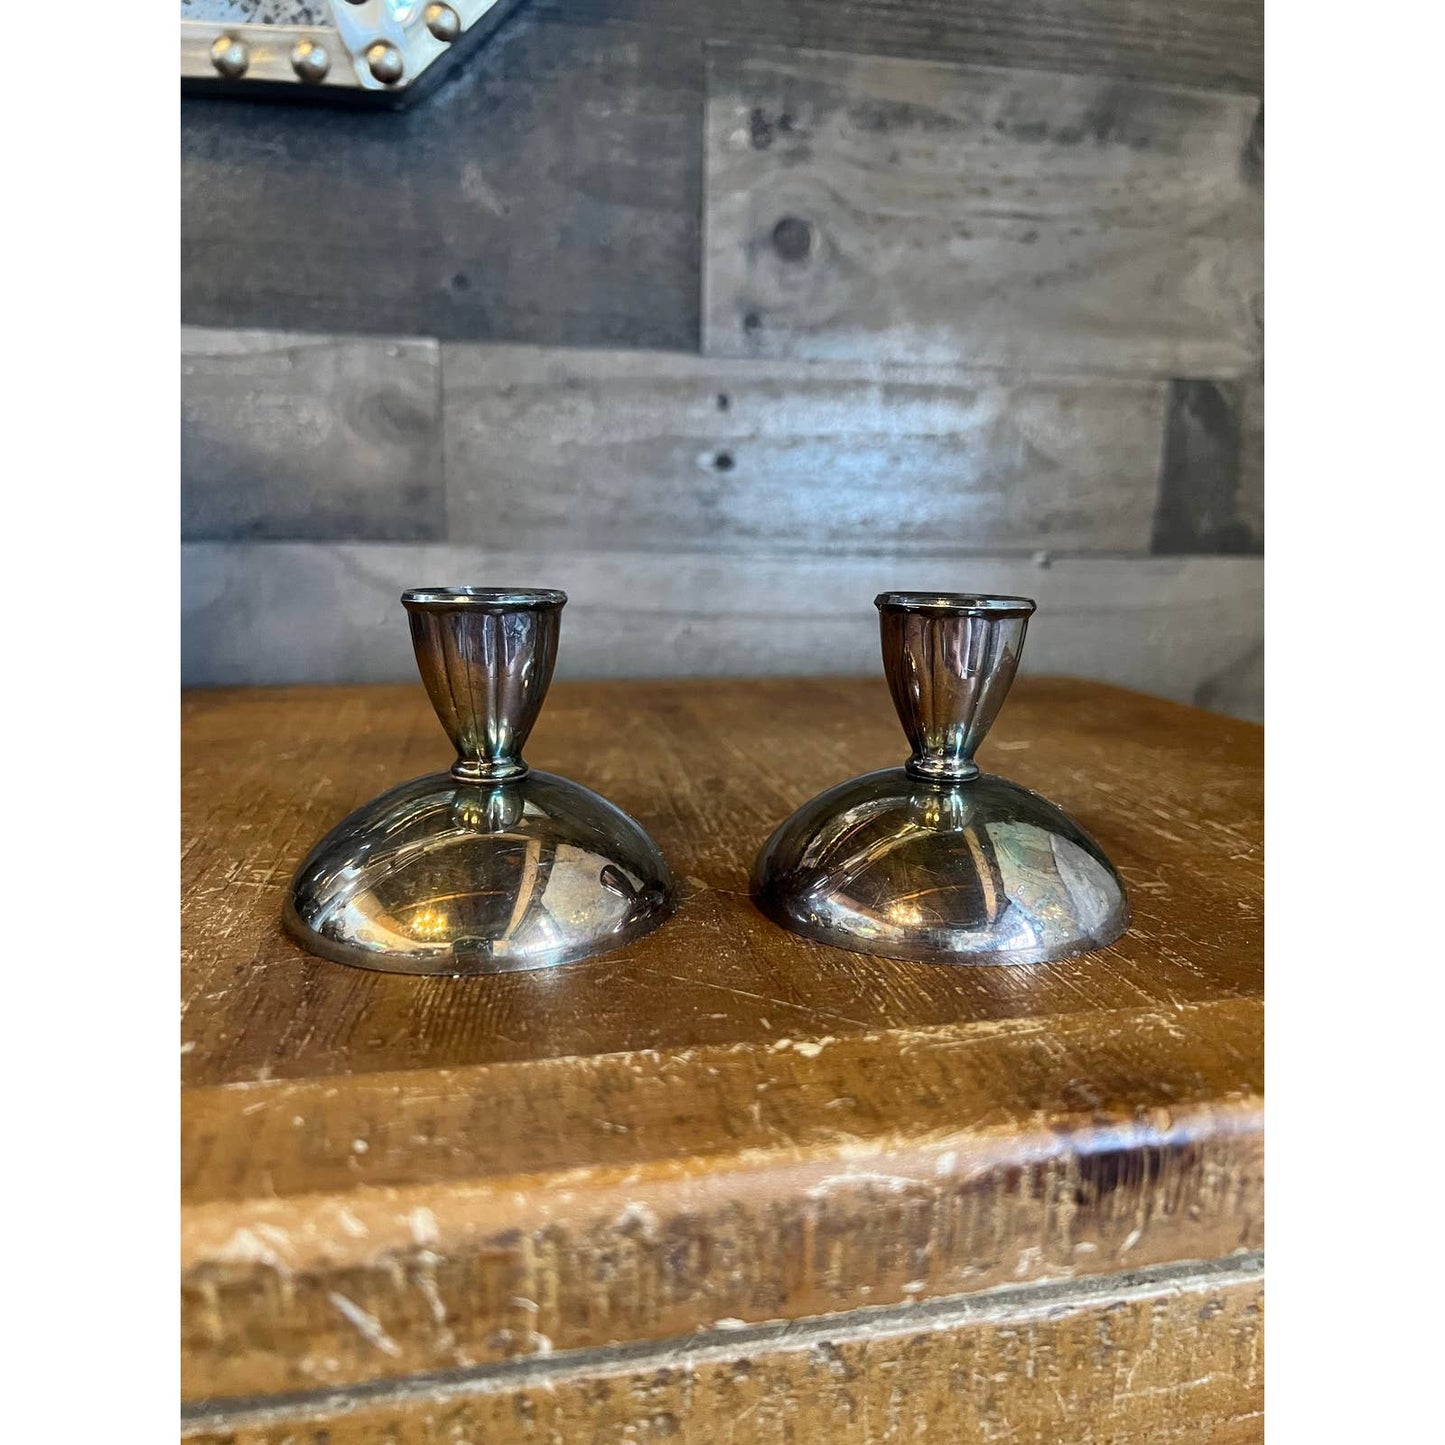 Vintage Oneida silver plated candlestick holders - pair